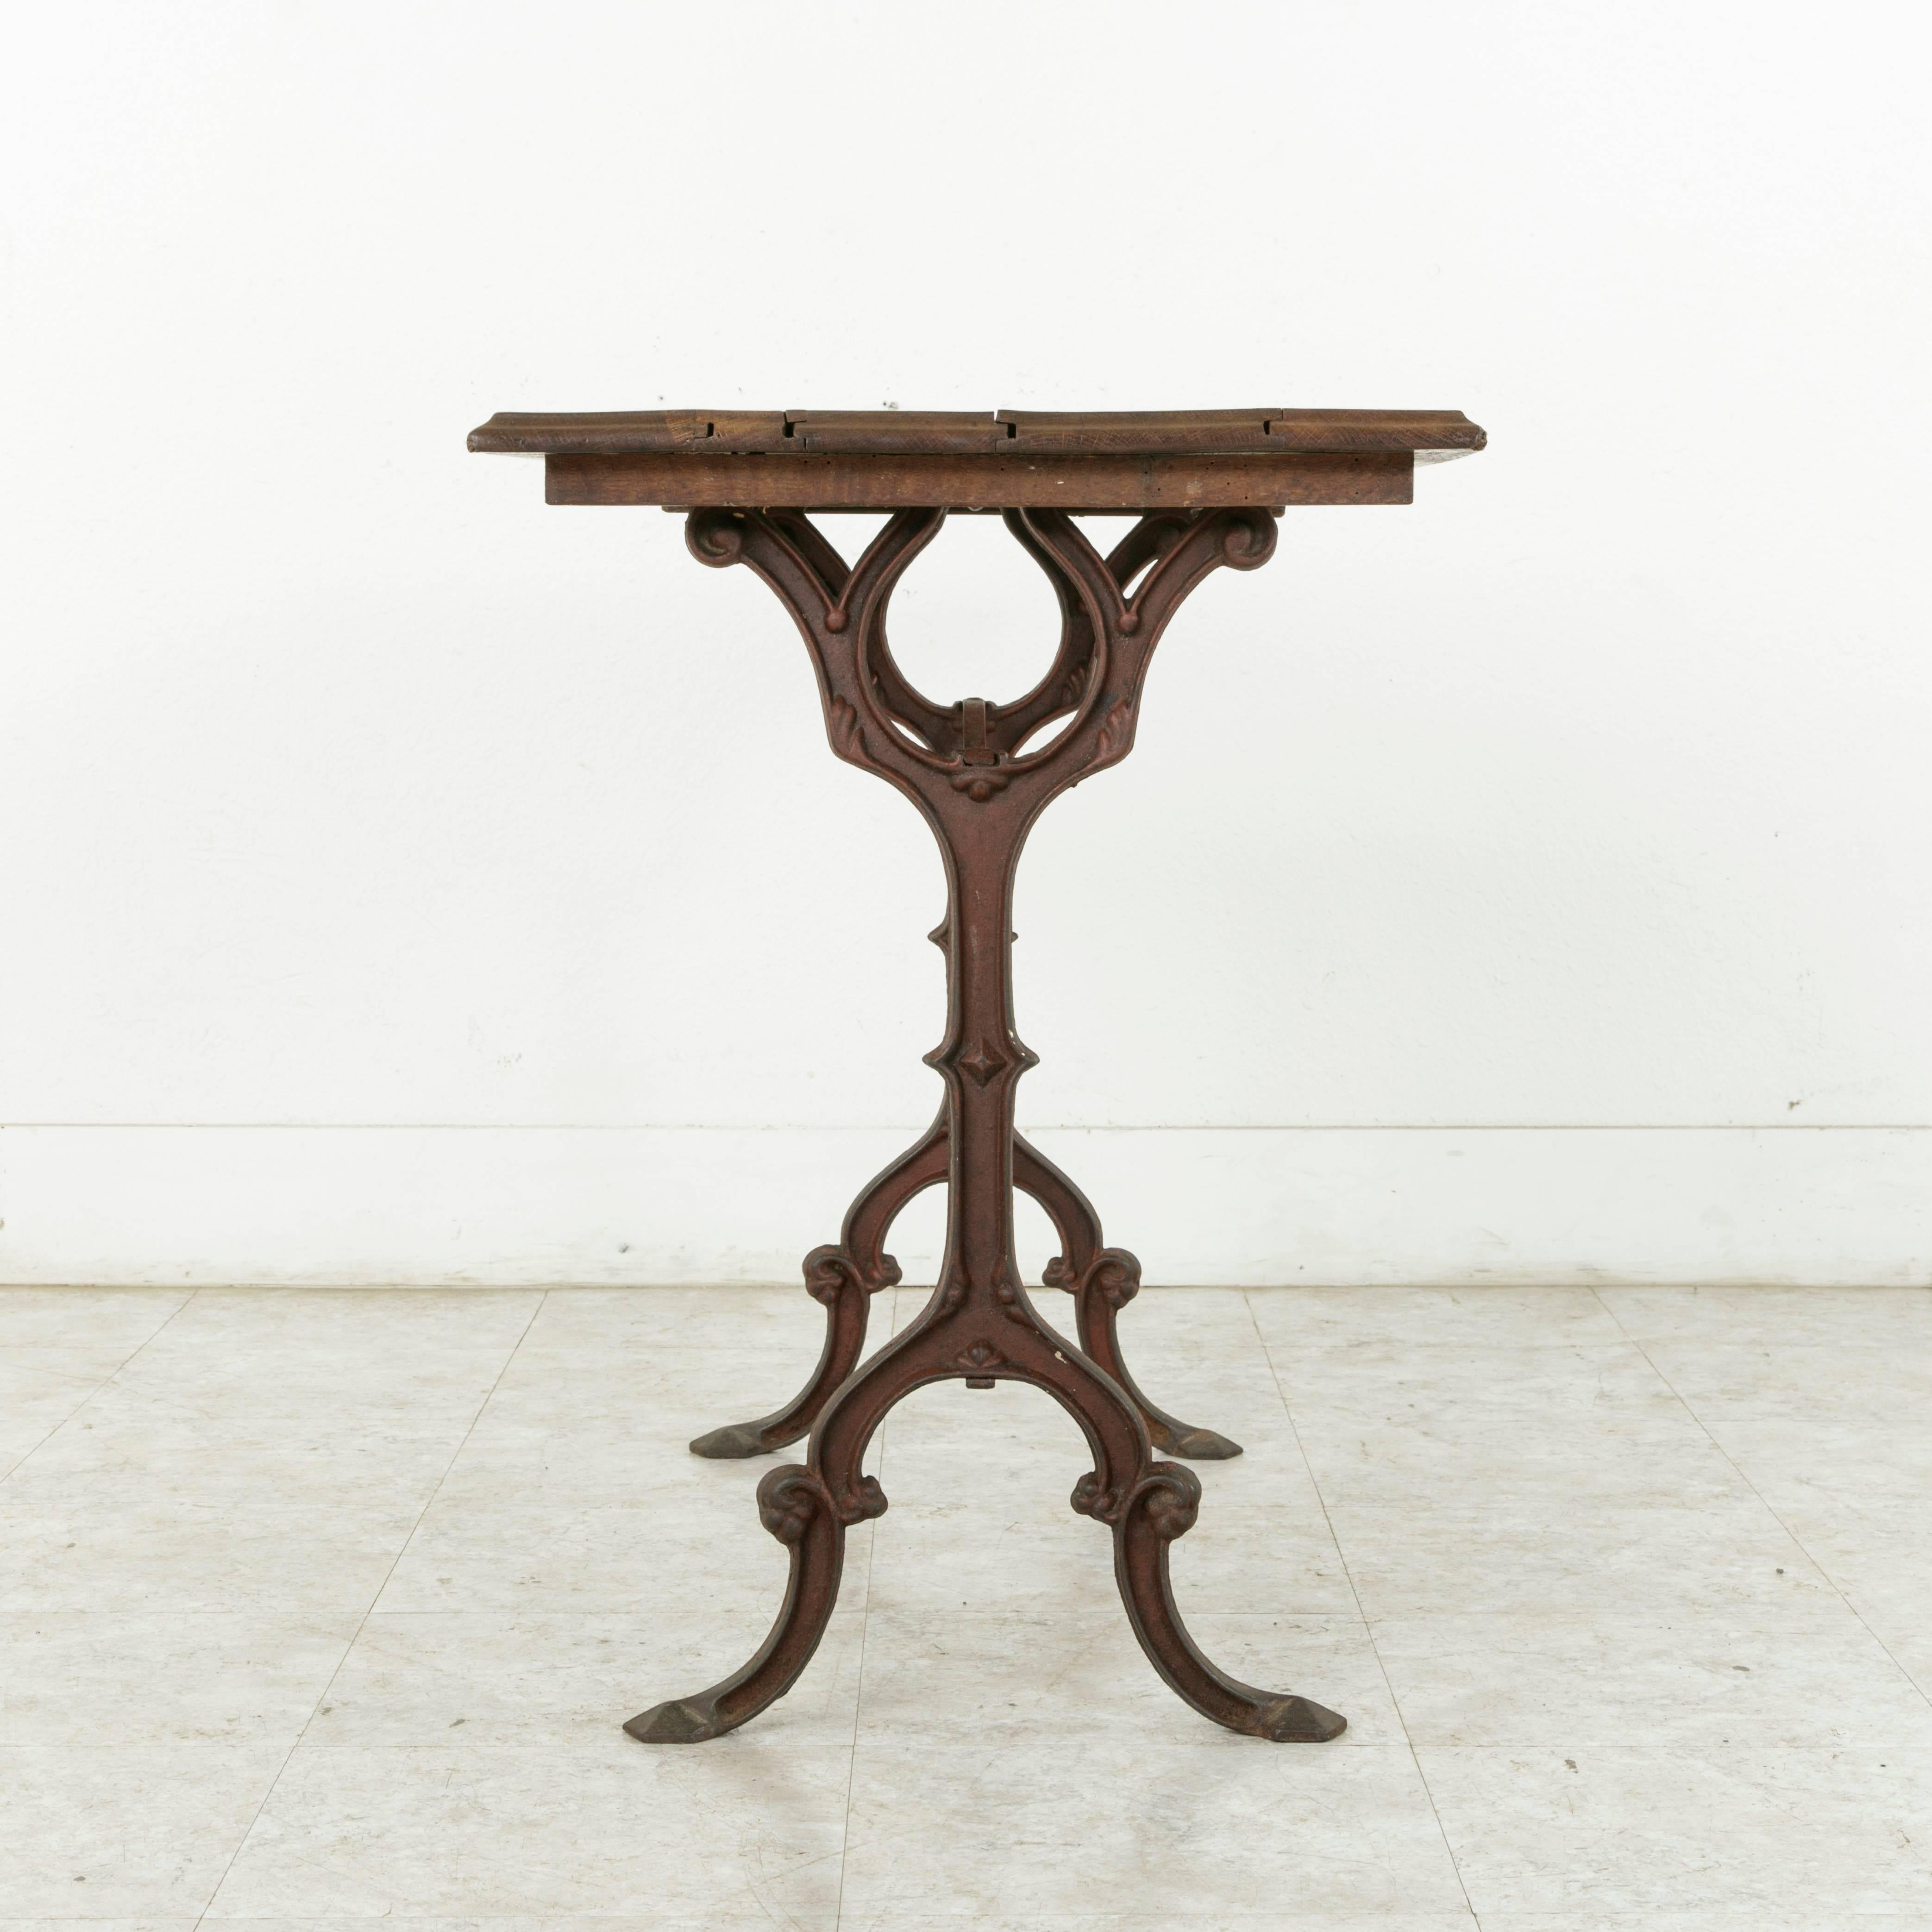 Early 20th Century French Cast Iron Bistro Table or Cafe Table with Oak Top, circa 1900